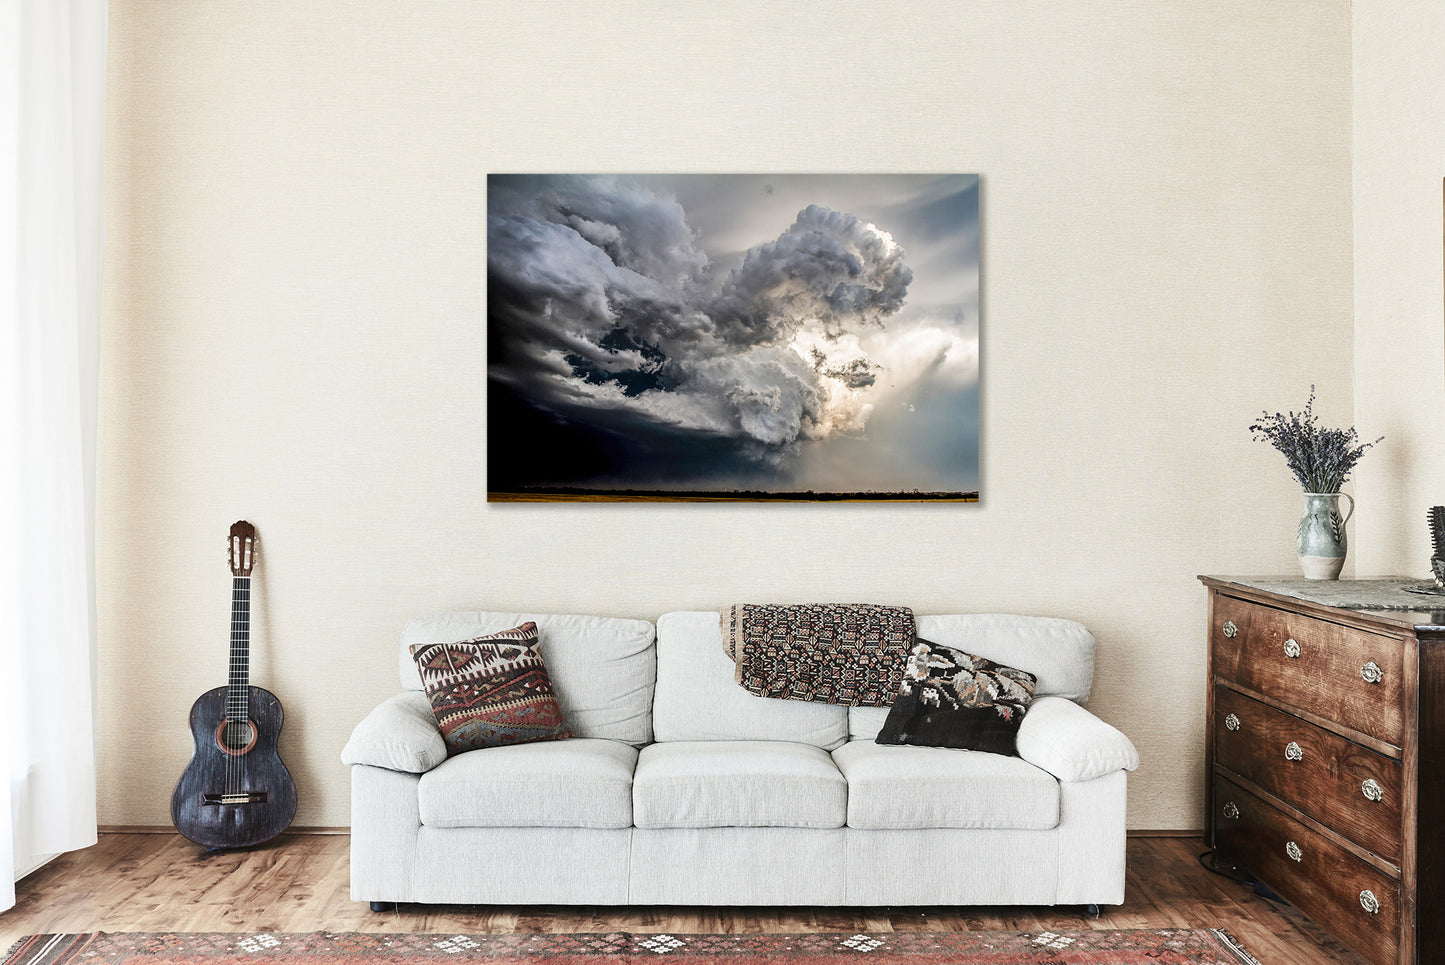 Nature Canvas Wall Art - Gallery Wrap of Storm Cloud Shaped as Fist Packing Punch Over Oklahoma Plains - Weather Photography Artwork Decor